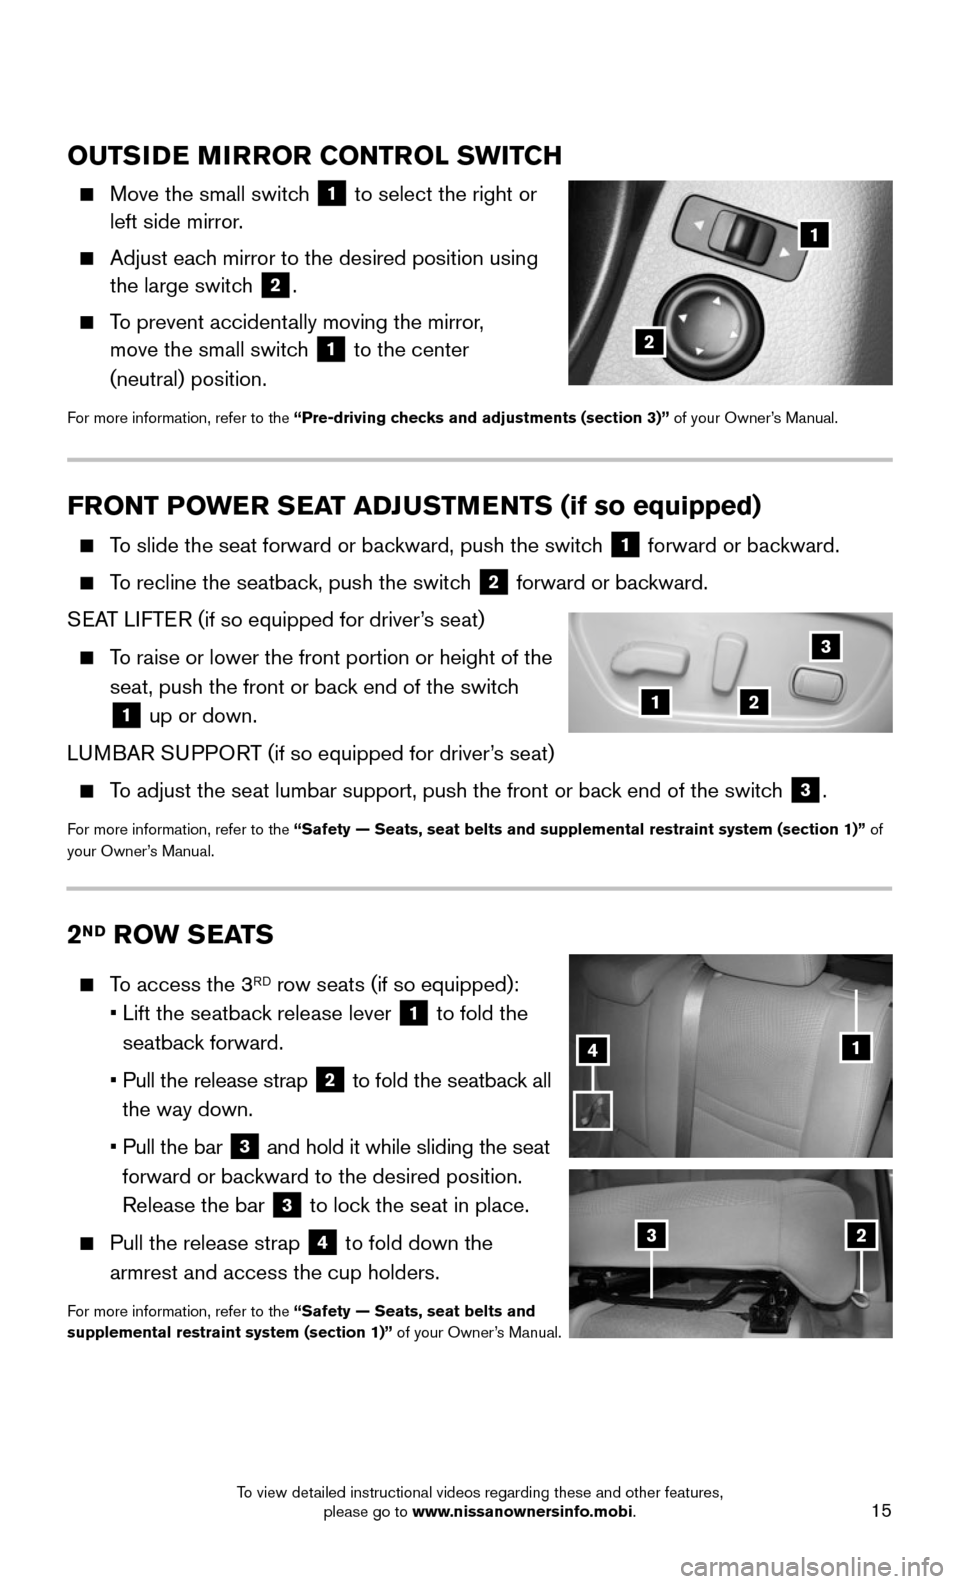 NISSAN ROGUE 2016 2.G Quick Reference Guide 15
2ND ROW SEATS
   To access the 3RD row seats (if so equipped): 
•  Lift the seatback release lever 1 to fold the 
seatback forward.
   •   Pull the release strap 2 to fold the seatback all 
the